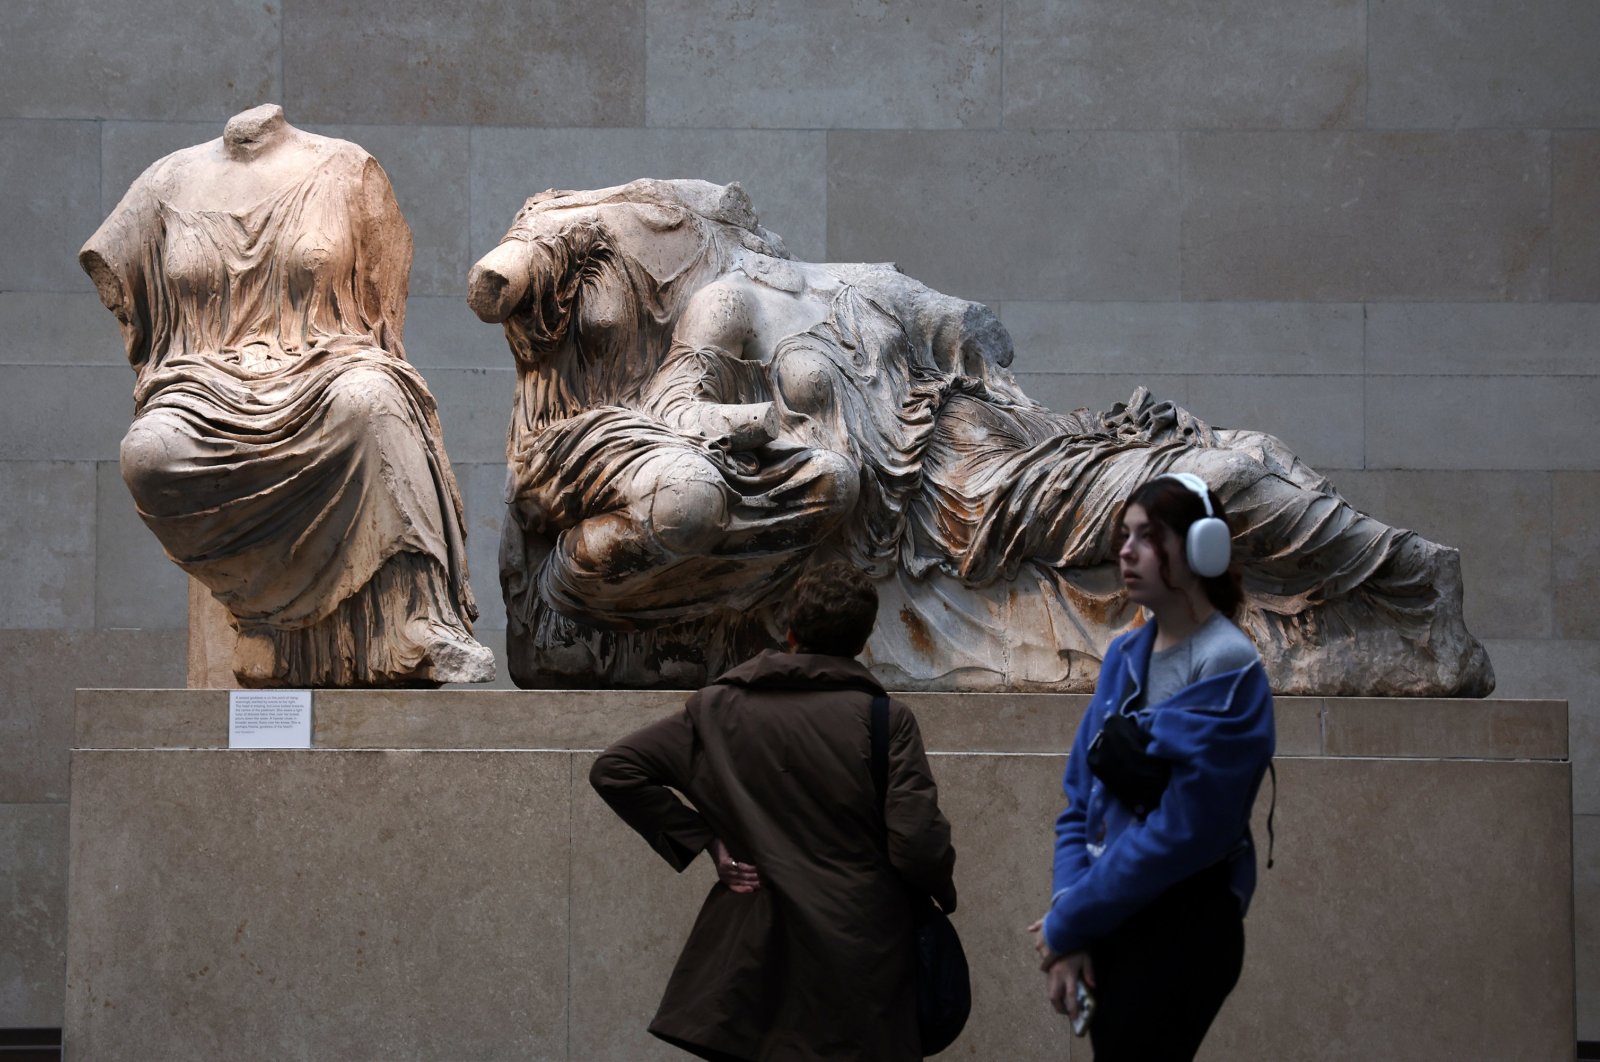 Visitors look at the Elgin marbles also known as the Parthenon marbles, at the British Museum in London, U.K., Nov. 28, 2023. (EPA Photo)